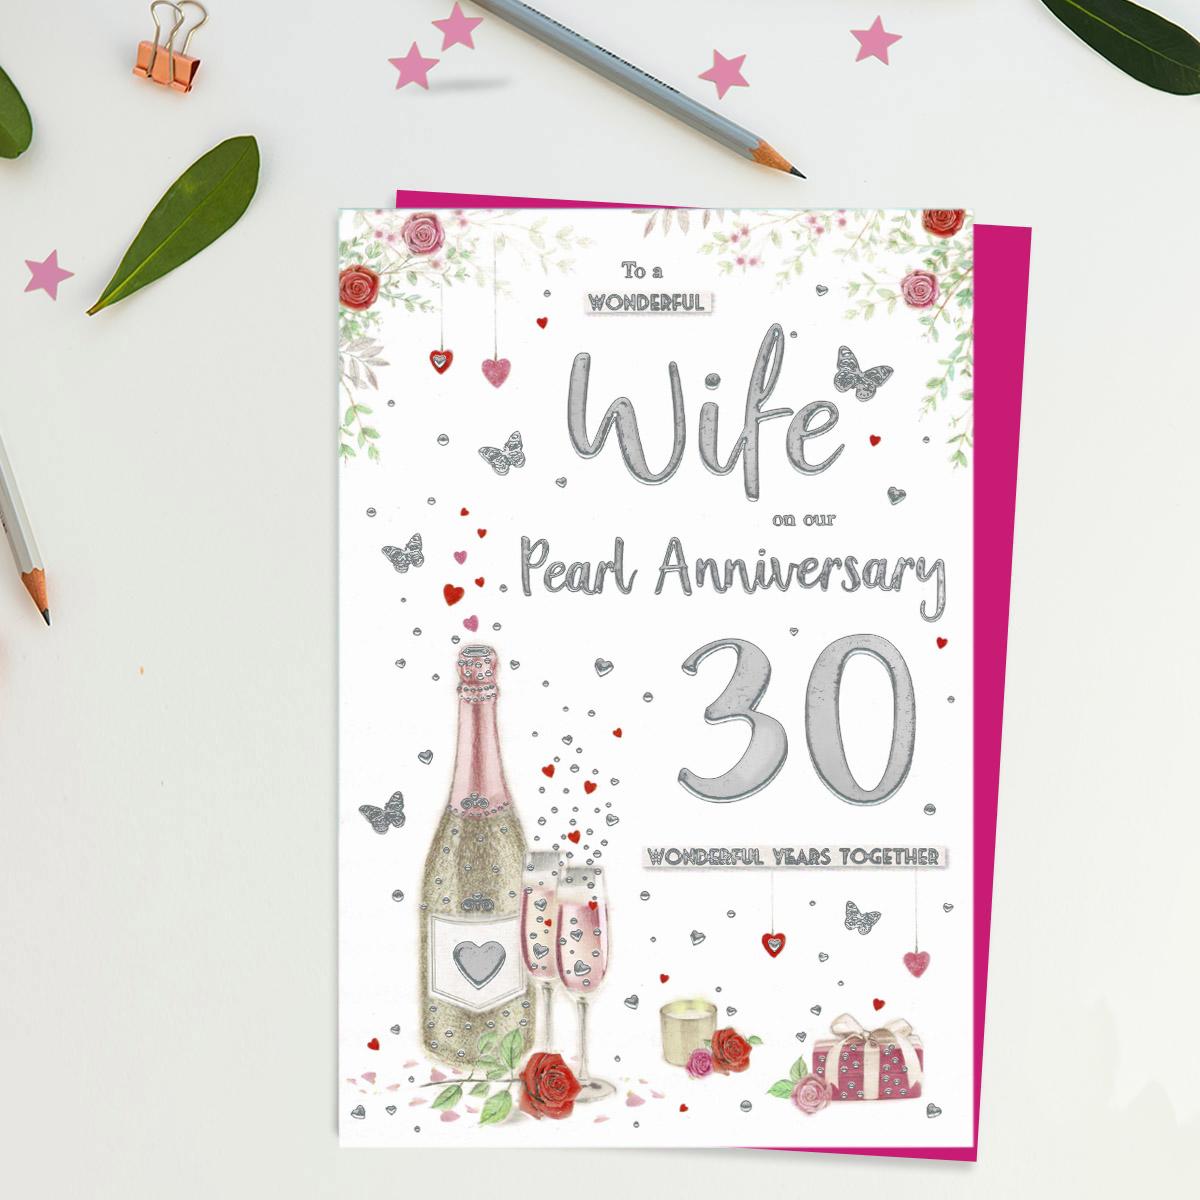 Wife Pearl Anniversary Card Sitting Alongside Its Pearl Ivory Envelope